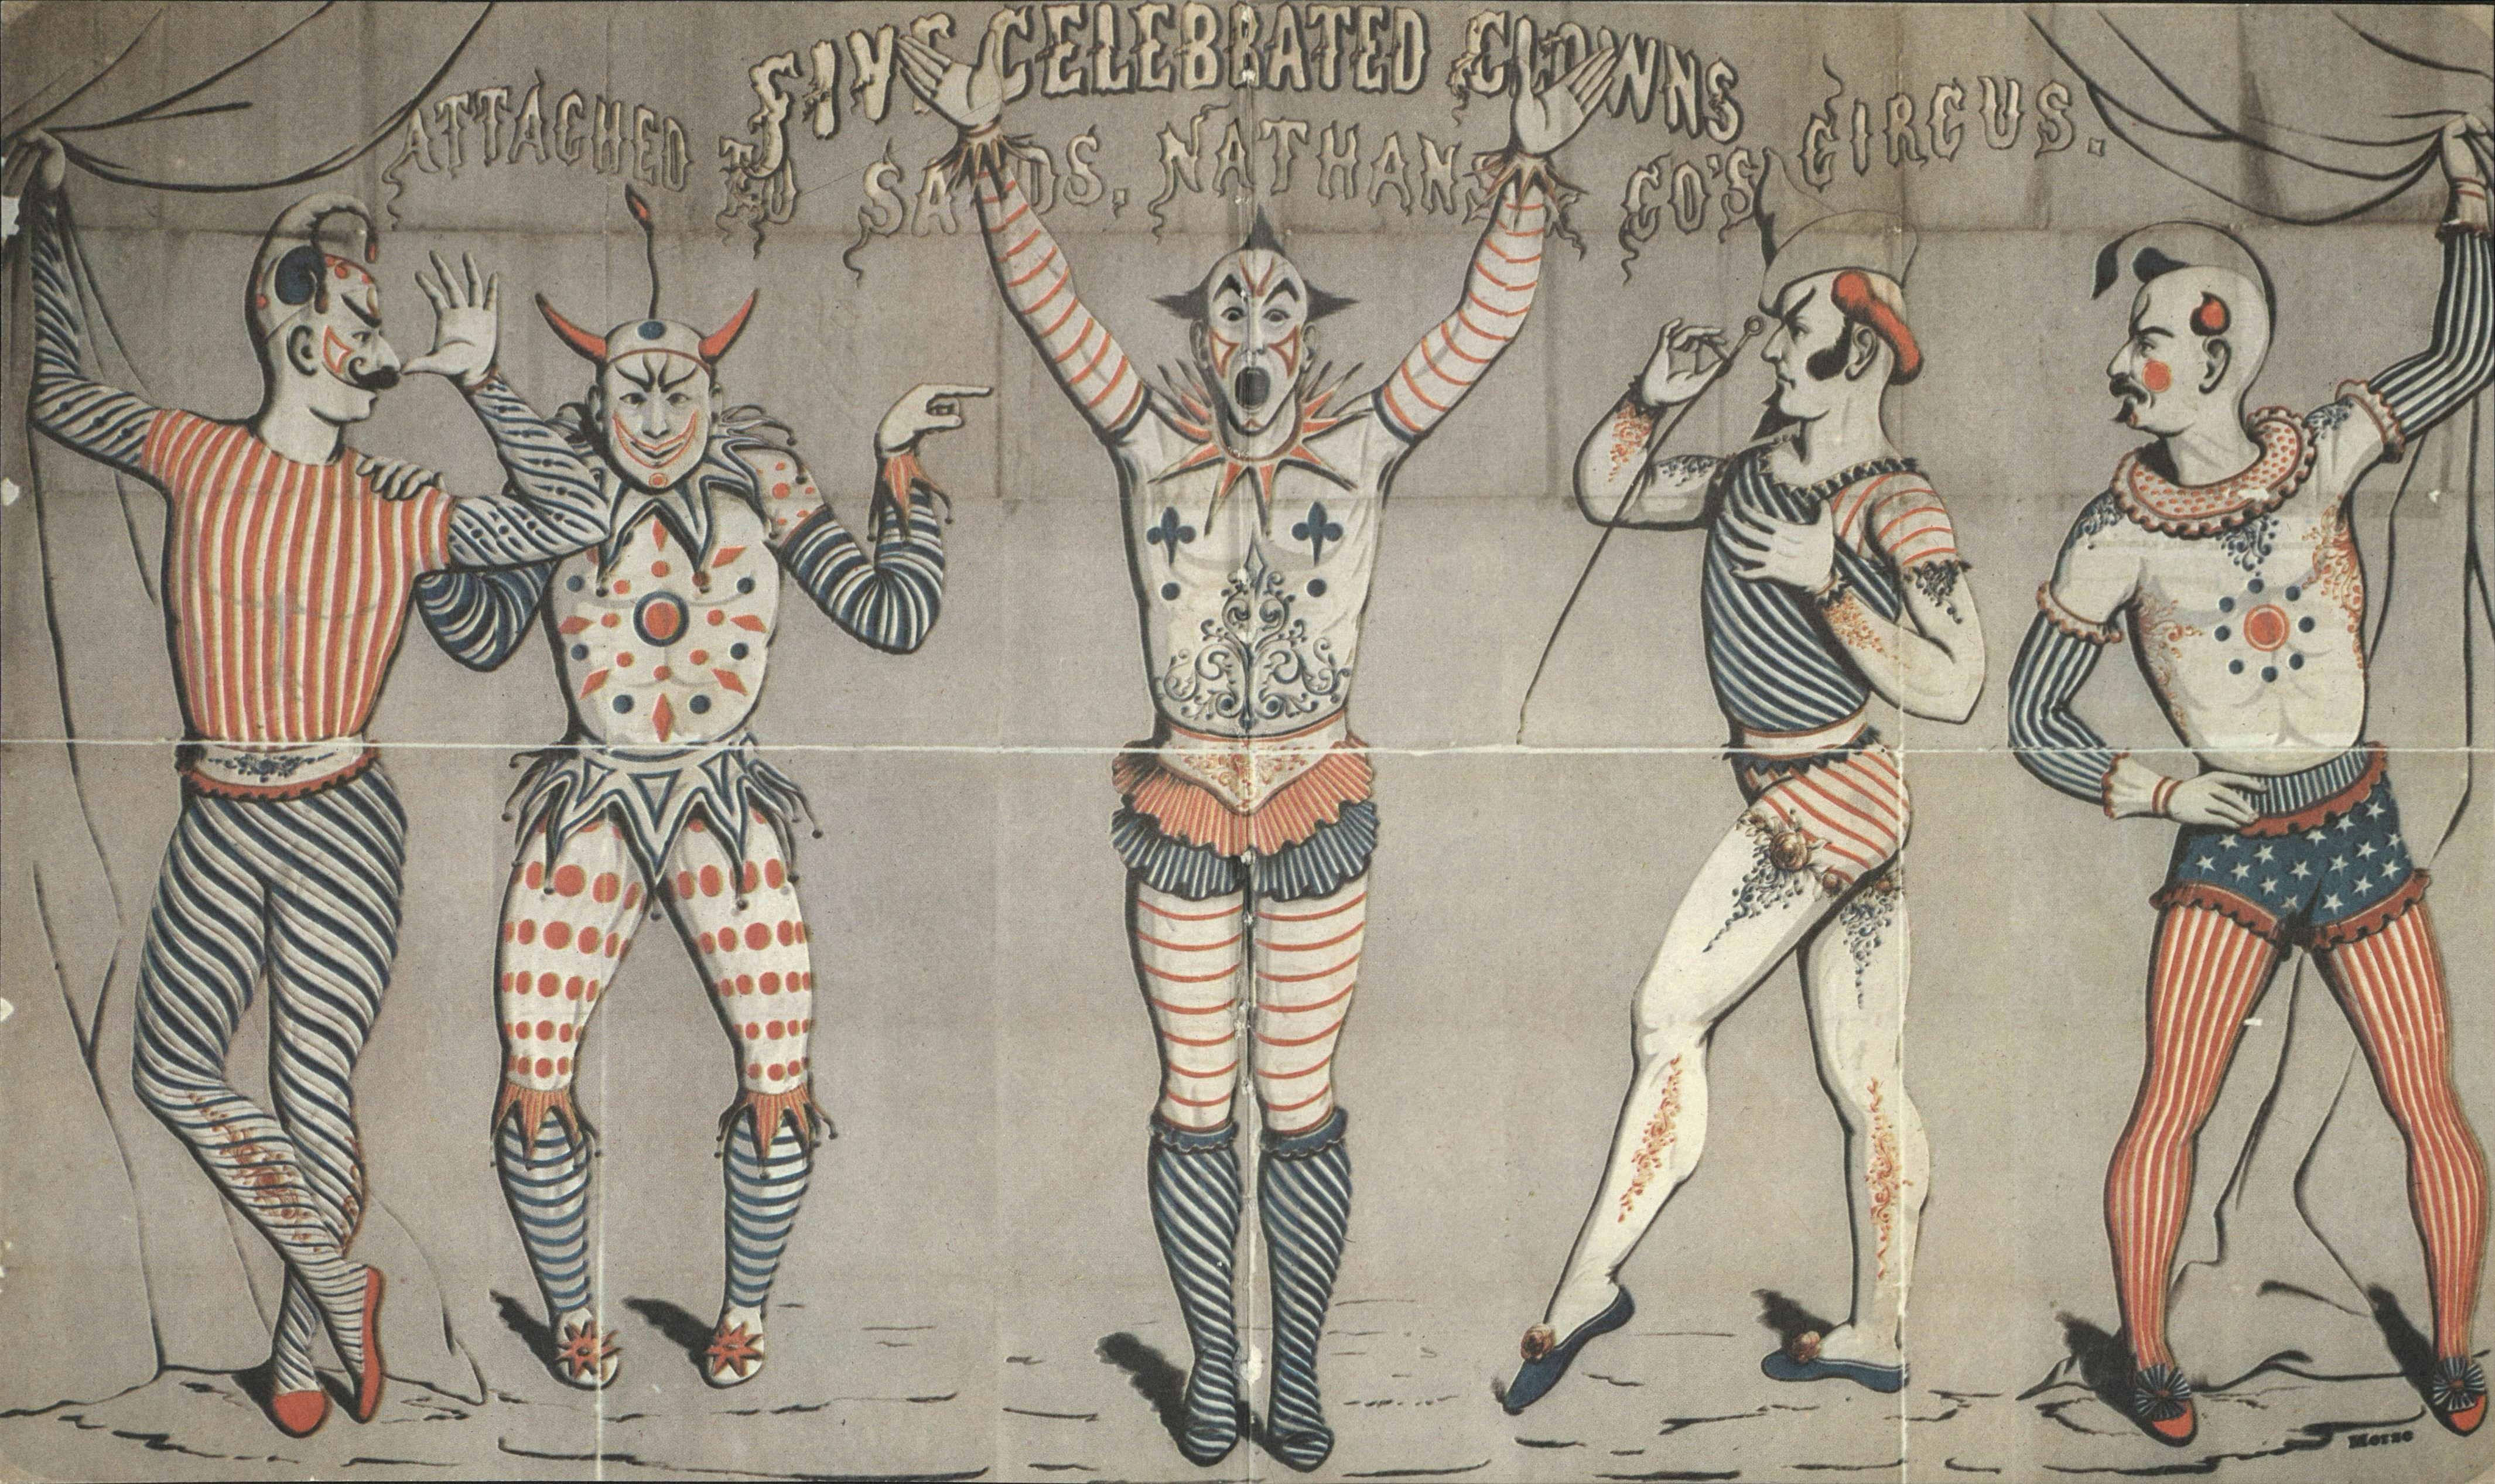 Artwork with clowns